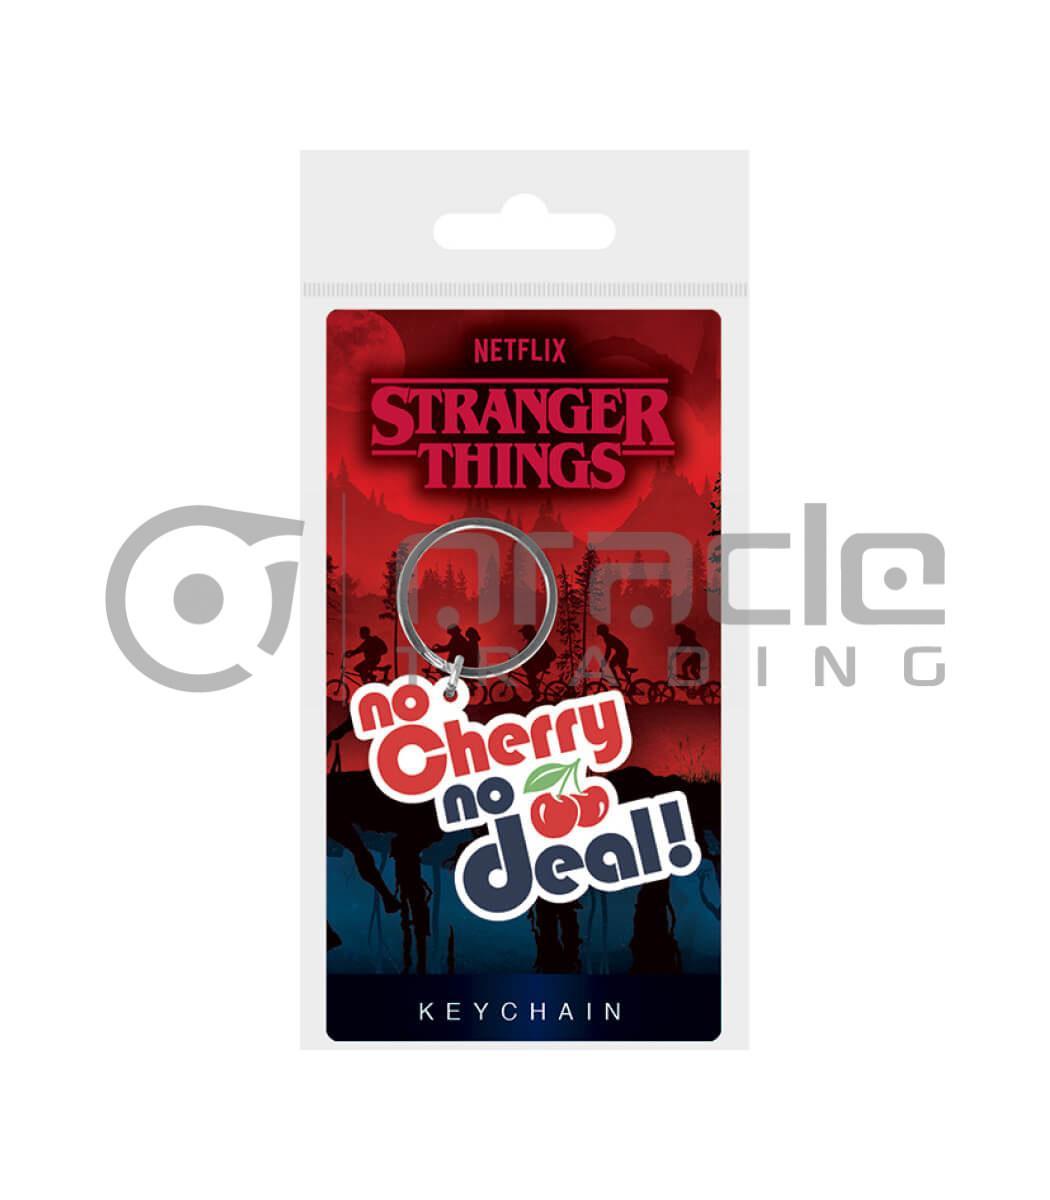 Stranger Things Keychain - No Cherry No Deal